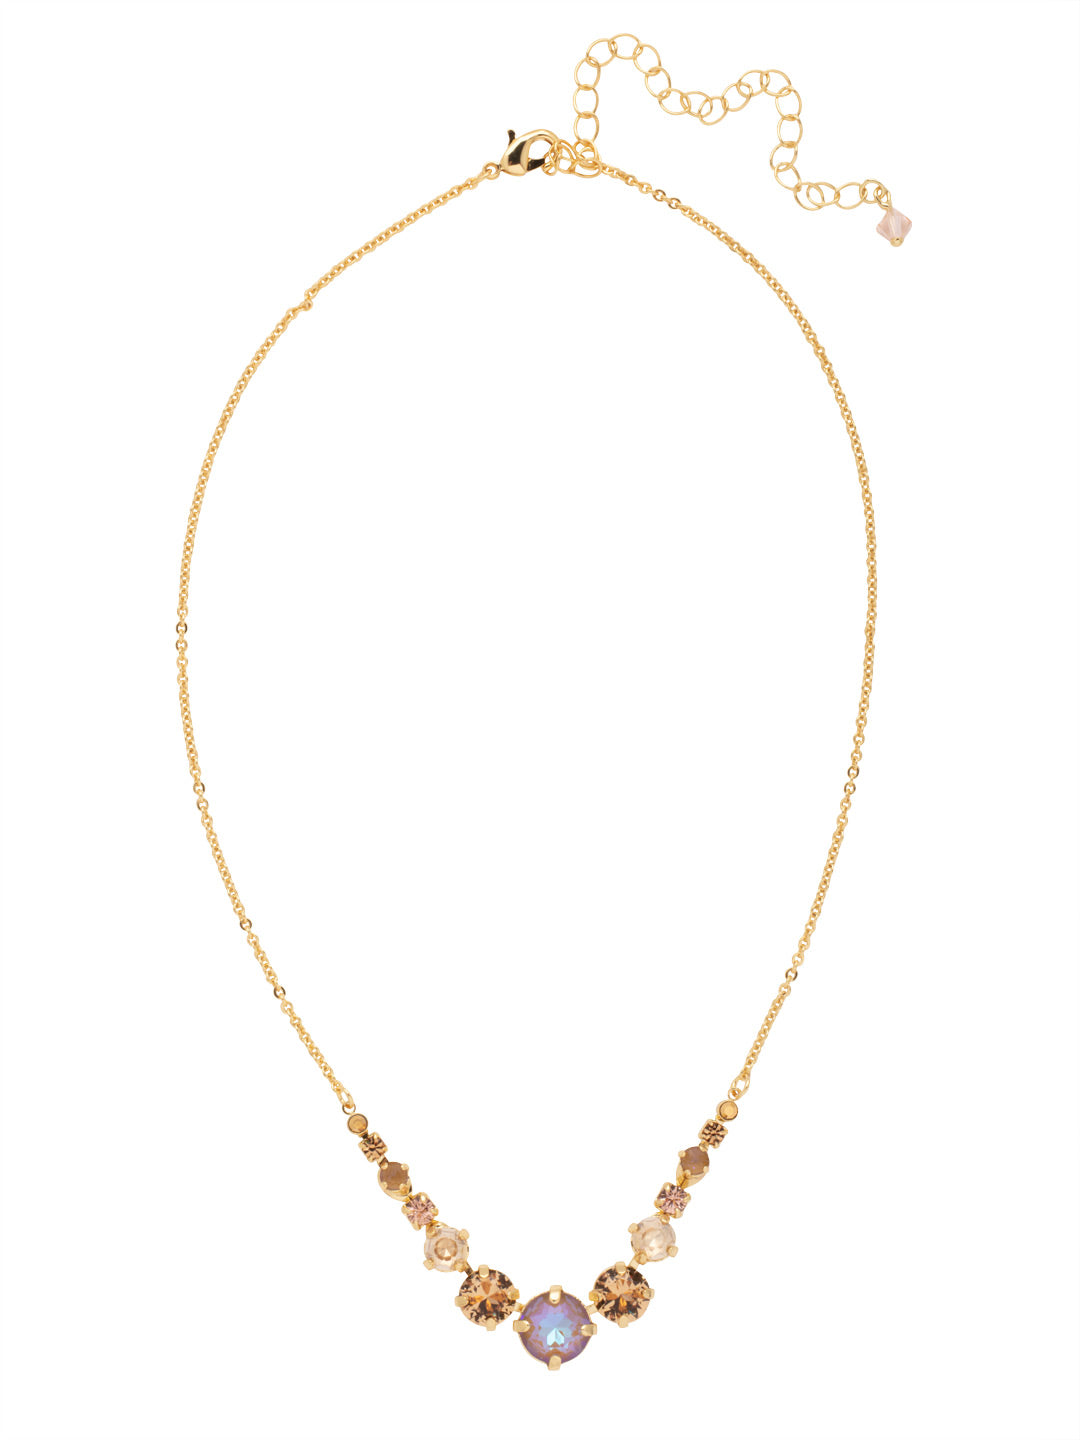 London Tennis Necklace - NCQ14BGRSU - <p>A long, simple chain paired with gorgeous round stones is exactly what every girl needs to dress things up. This round stone necklace is perfect for layering, or to just wear alone. Let the simple sparkle take over. From Sorrelli's Raw Sugar collection in our Bright Gold-tone finish.</p>